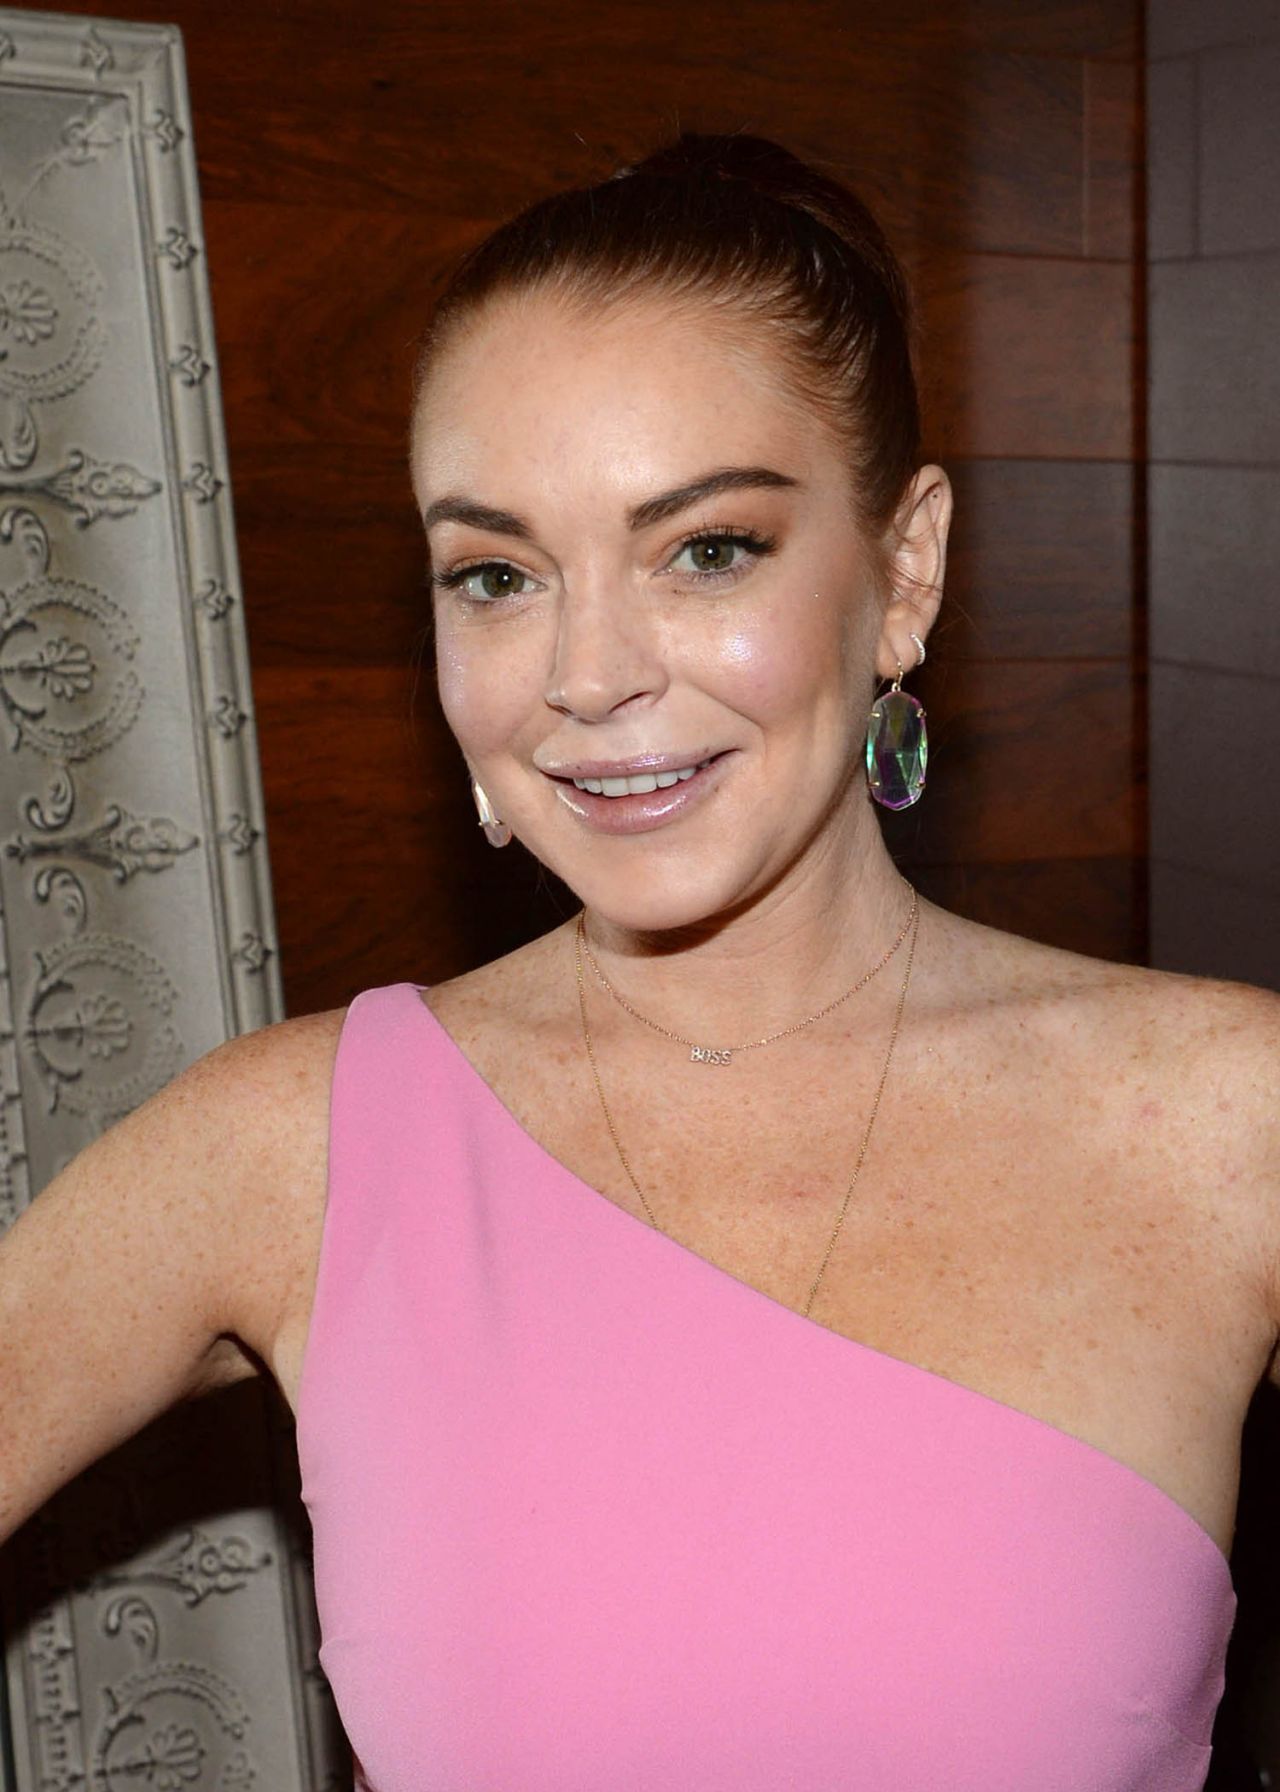 lindsay-lohan-backstage-at-the-rachael-ray-show-in-nyc-01-08-2019-13.jpg